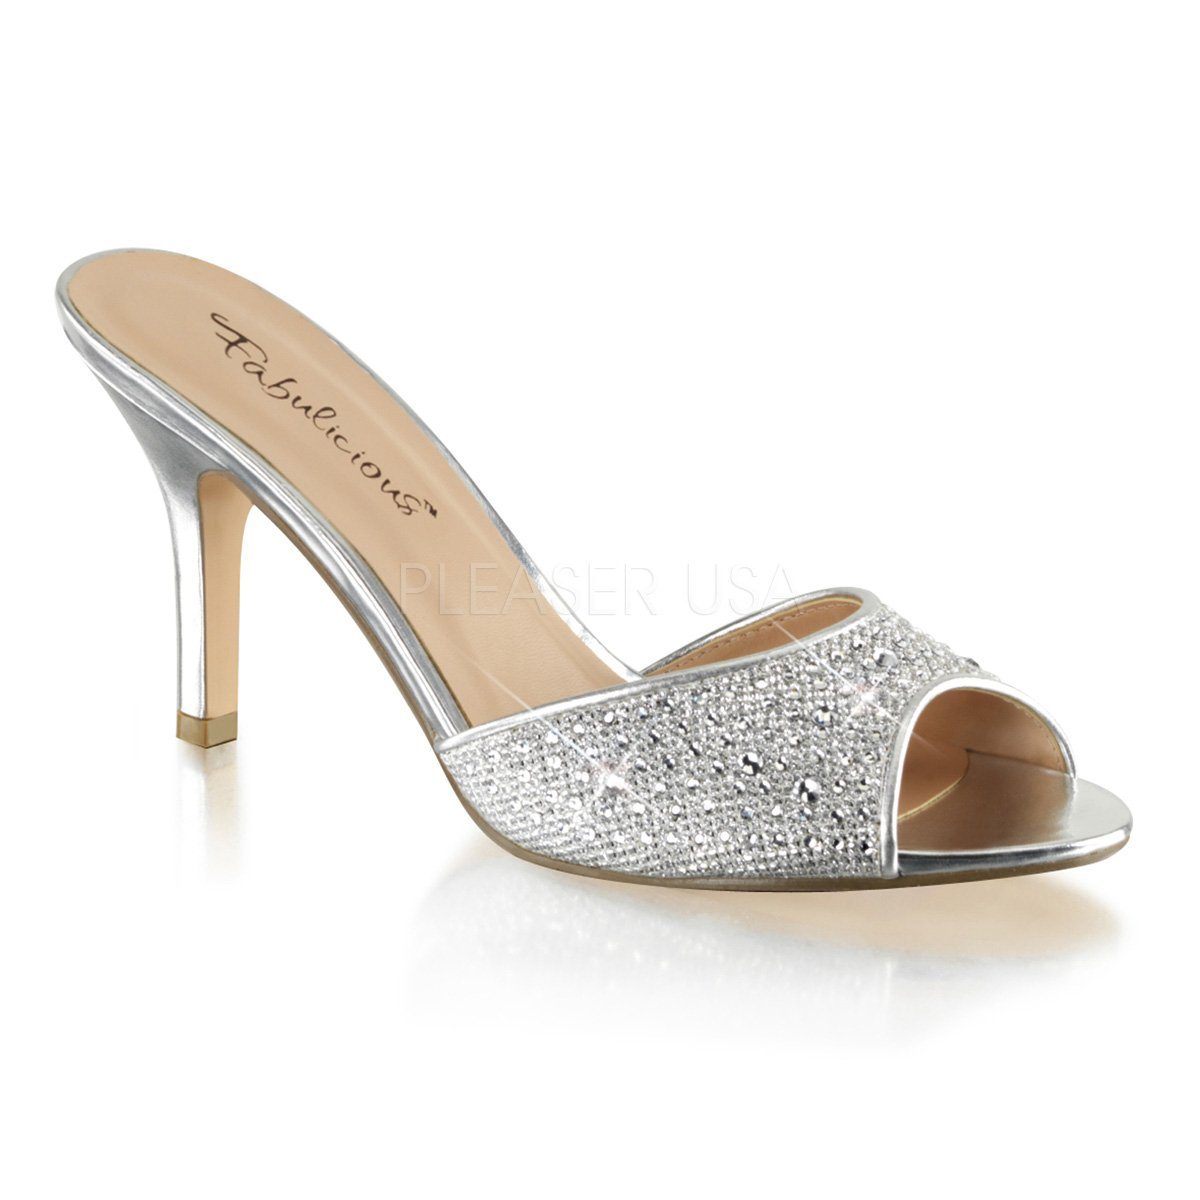 Fabulicious Pantolette LUCY-01 - Silber High-Heel-Pumps